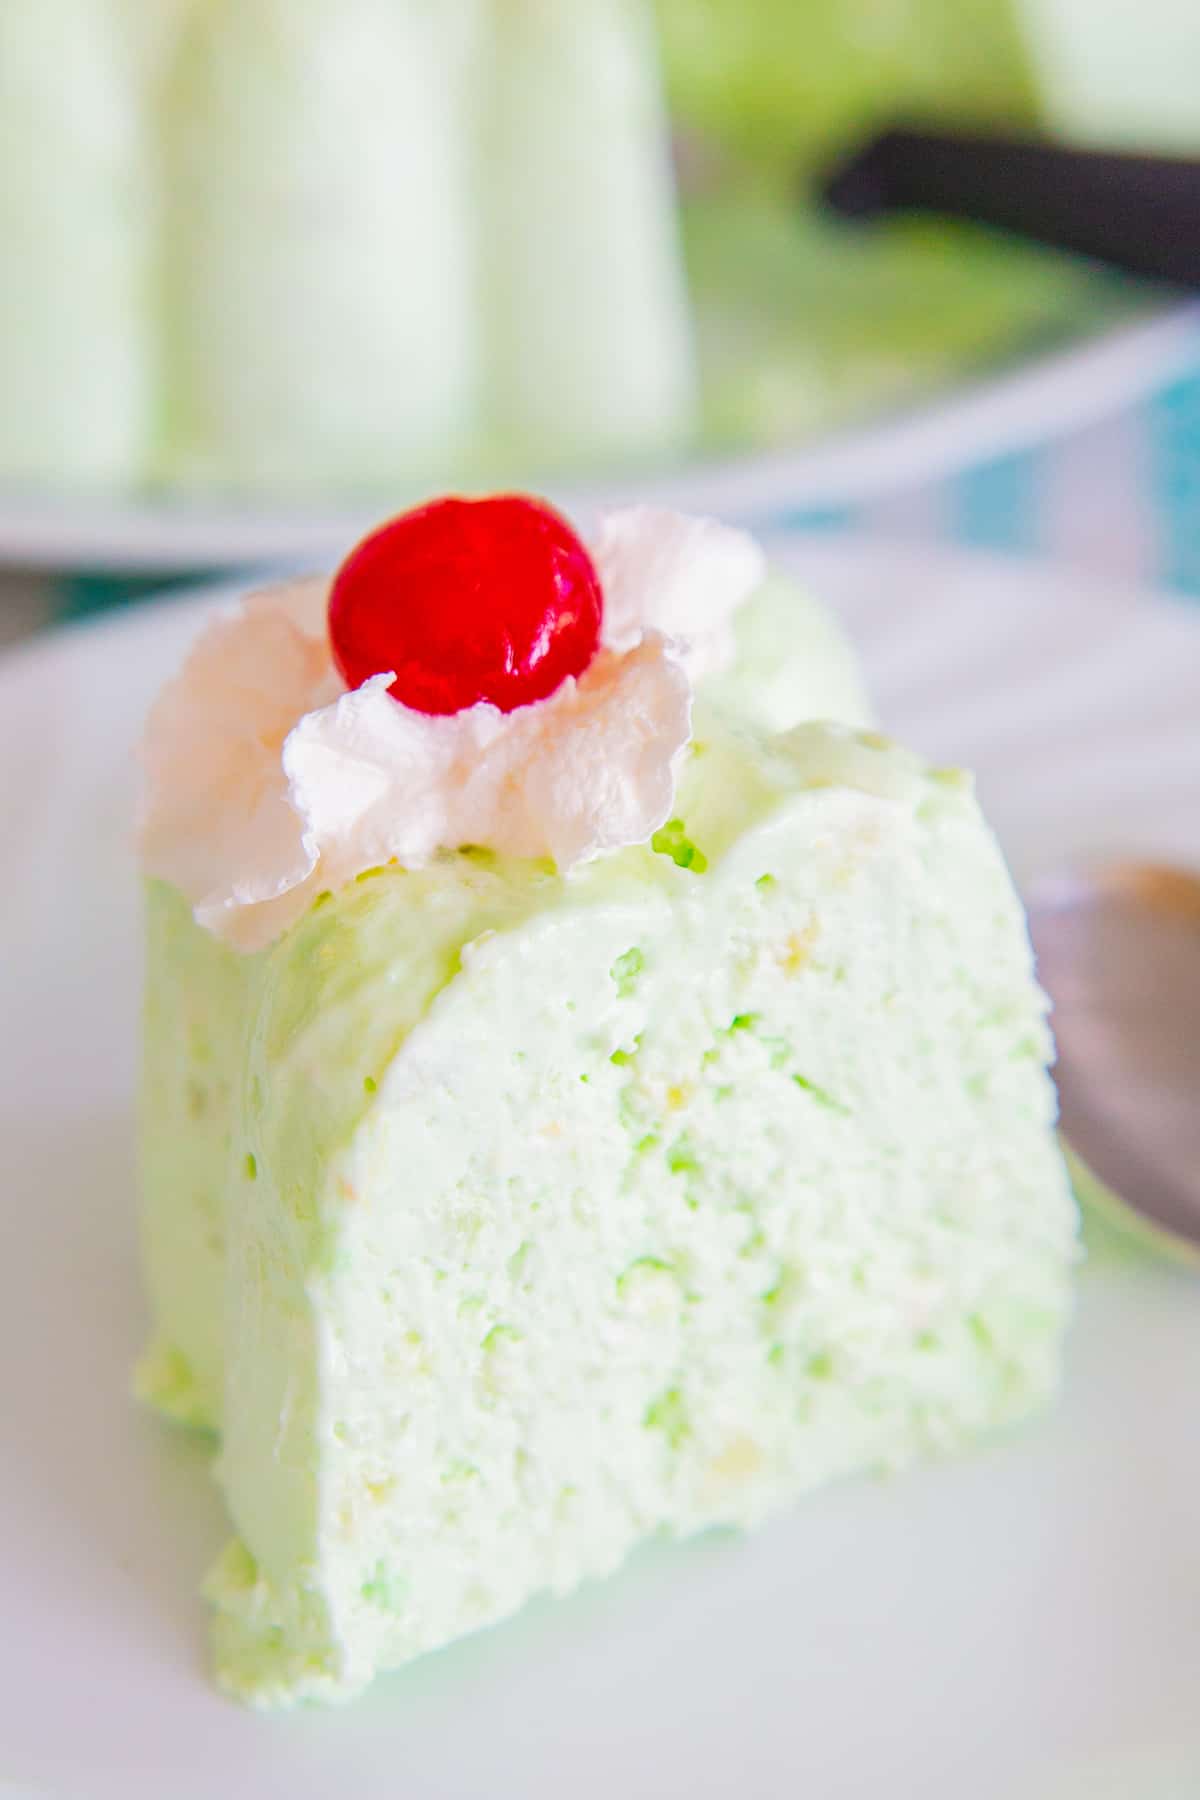 a Slice of Seafoam Salad topped with Whipped Cream and Red Cherry